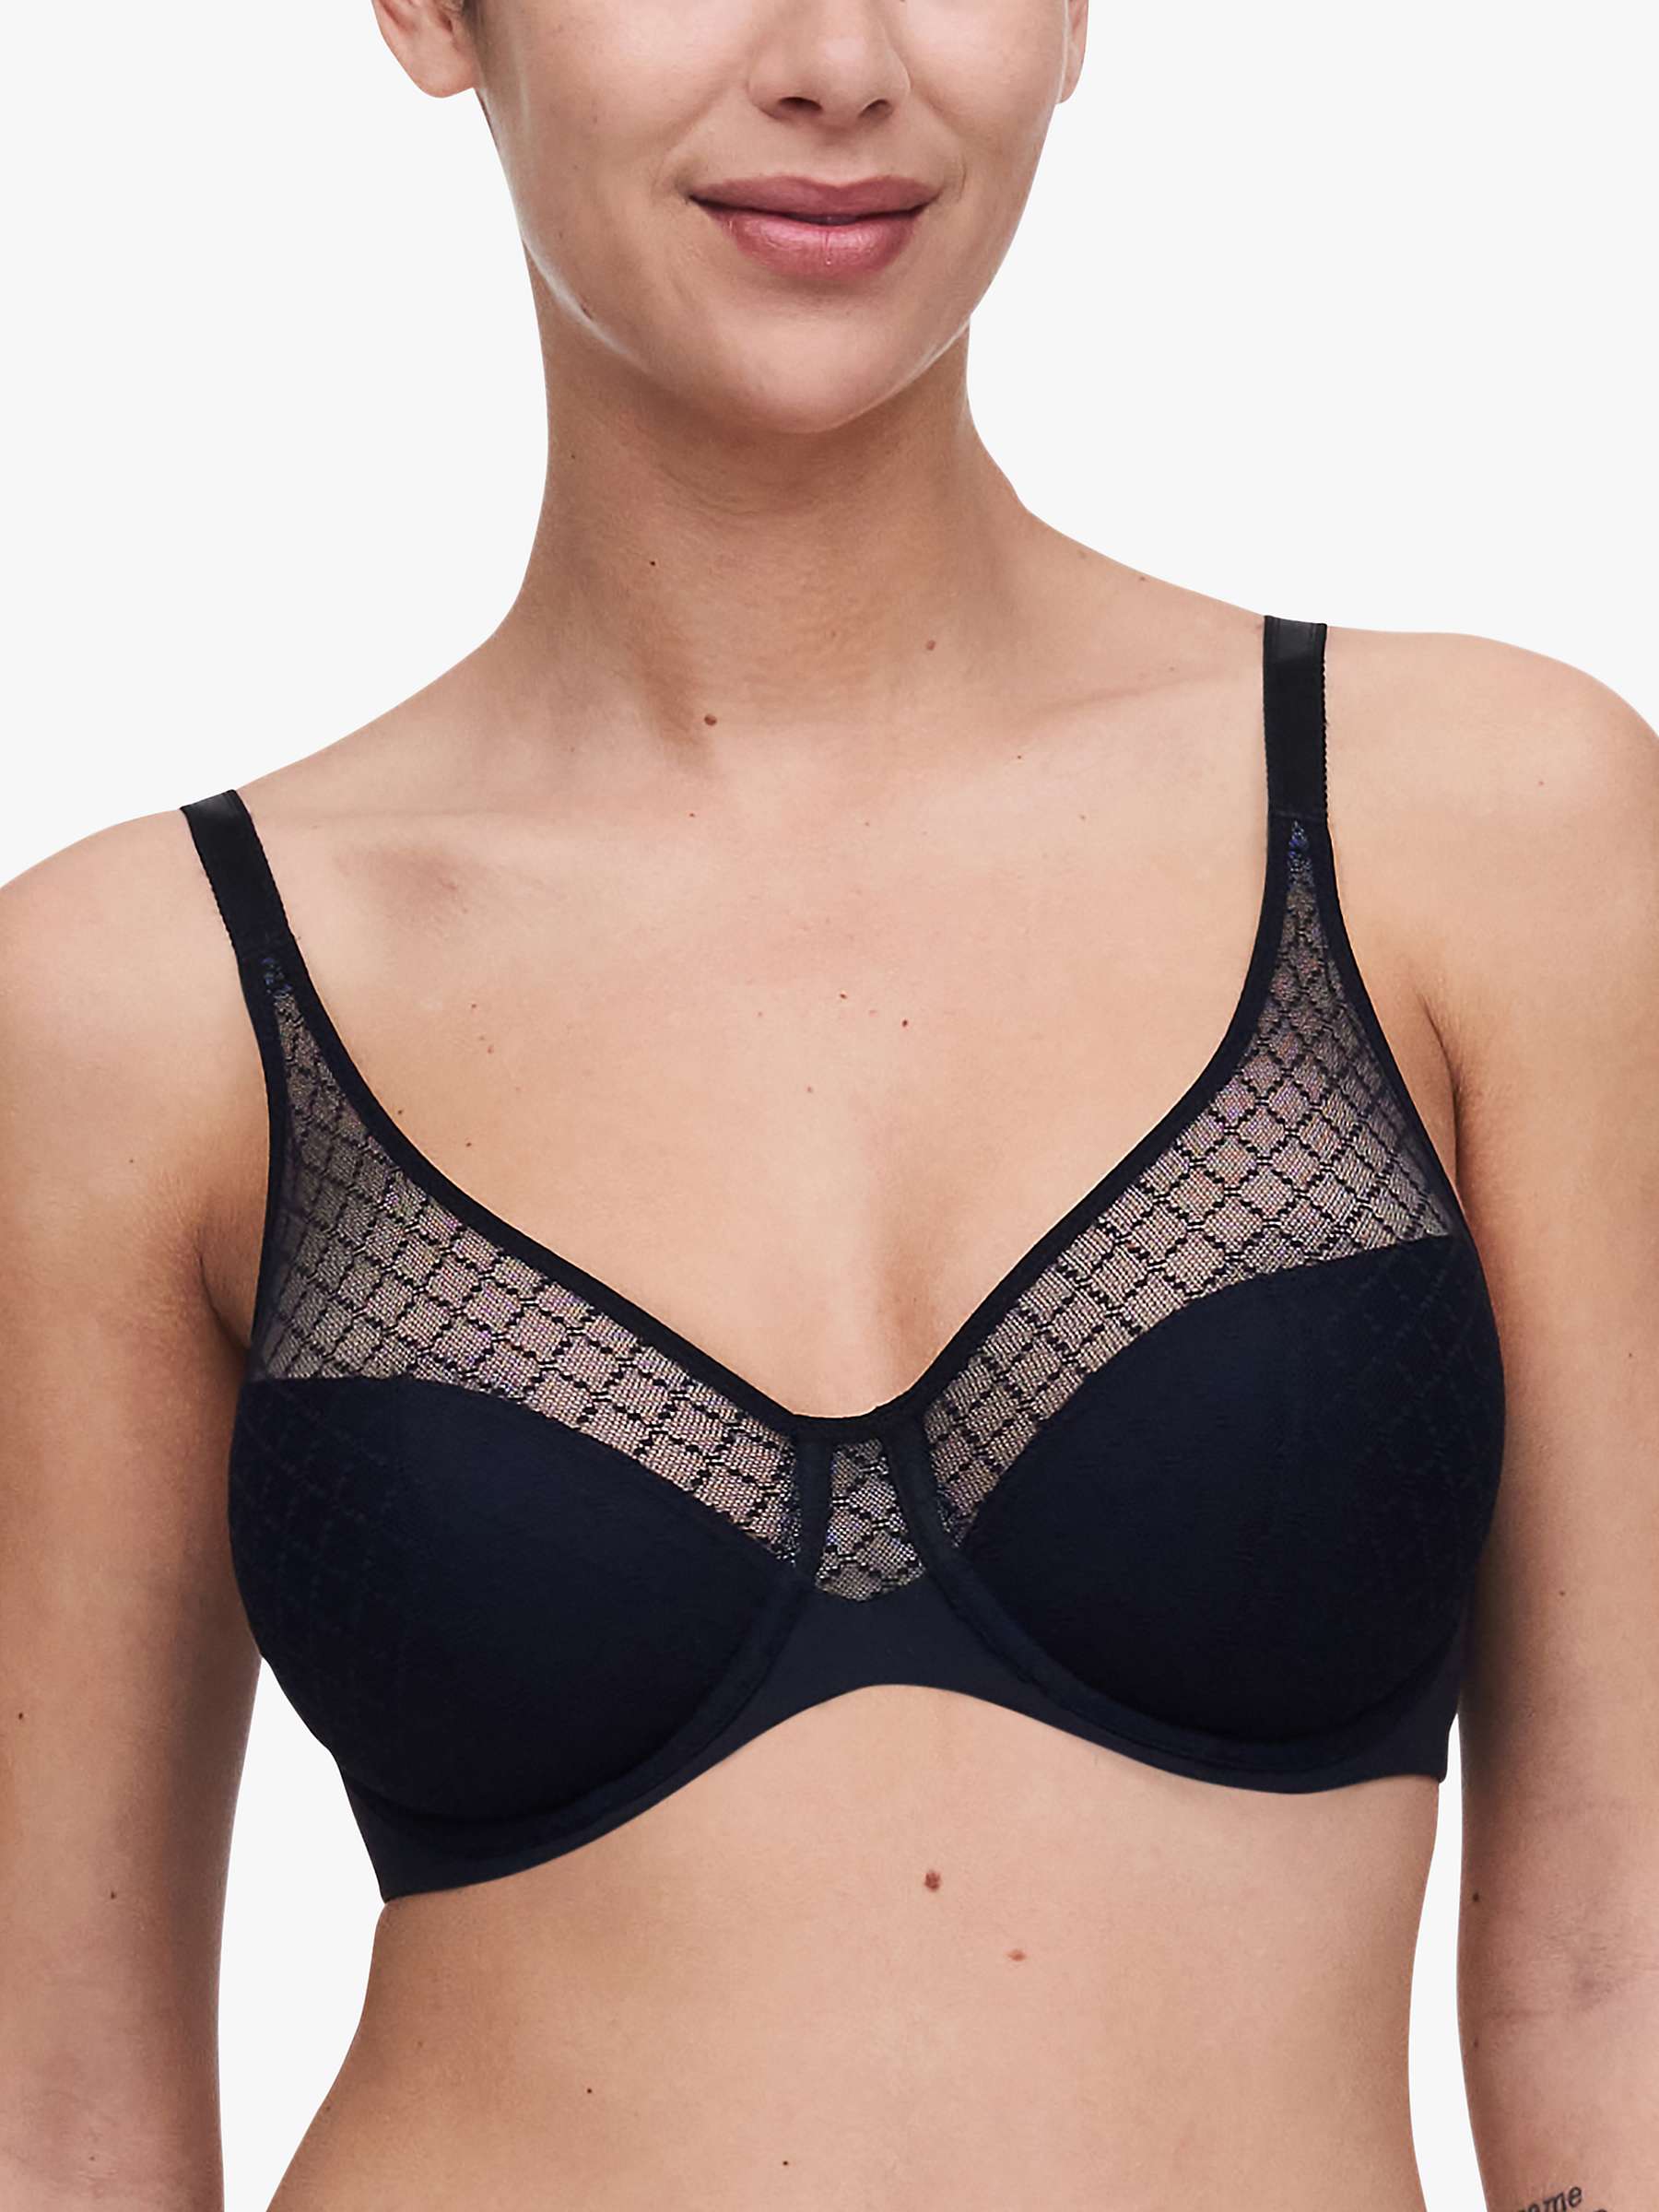 Buy Chantelle Norah Chic Moulded Underwire Bra Online at johnlewis.com